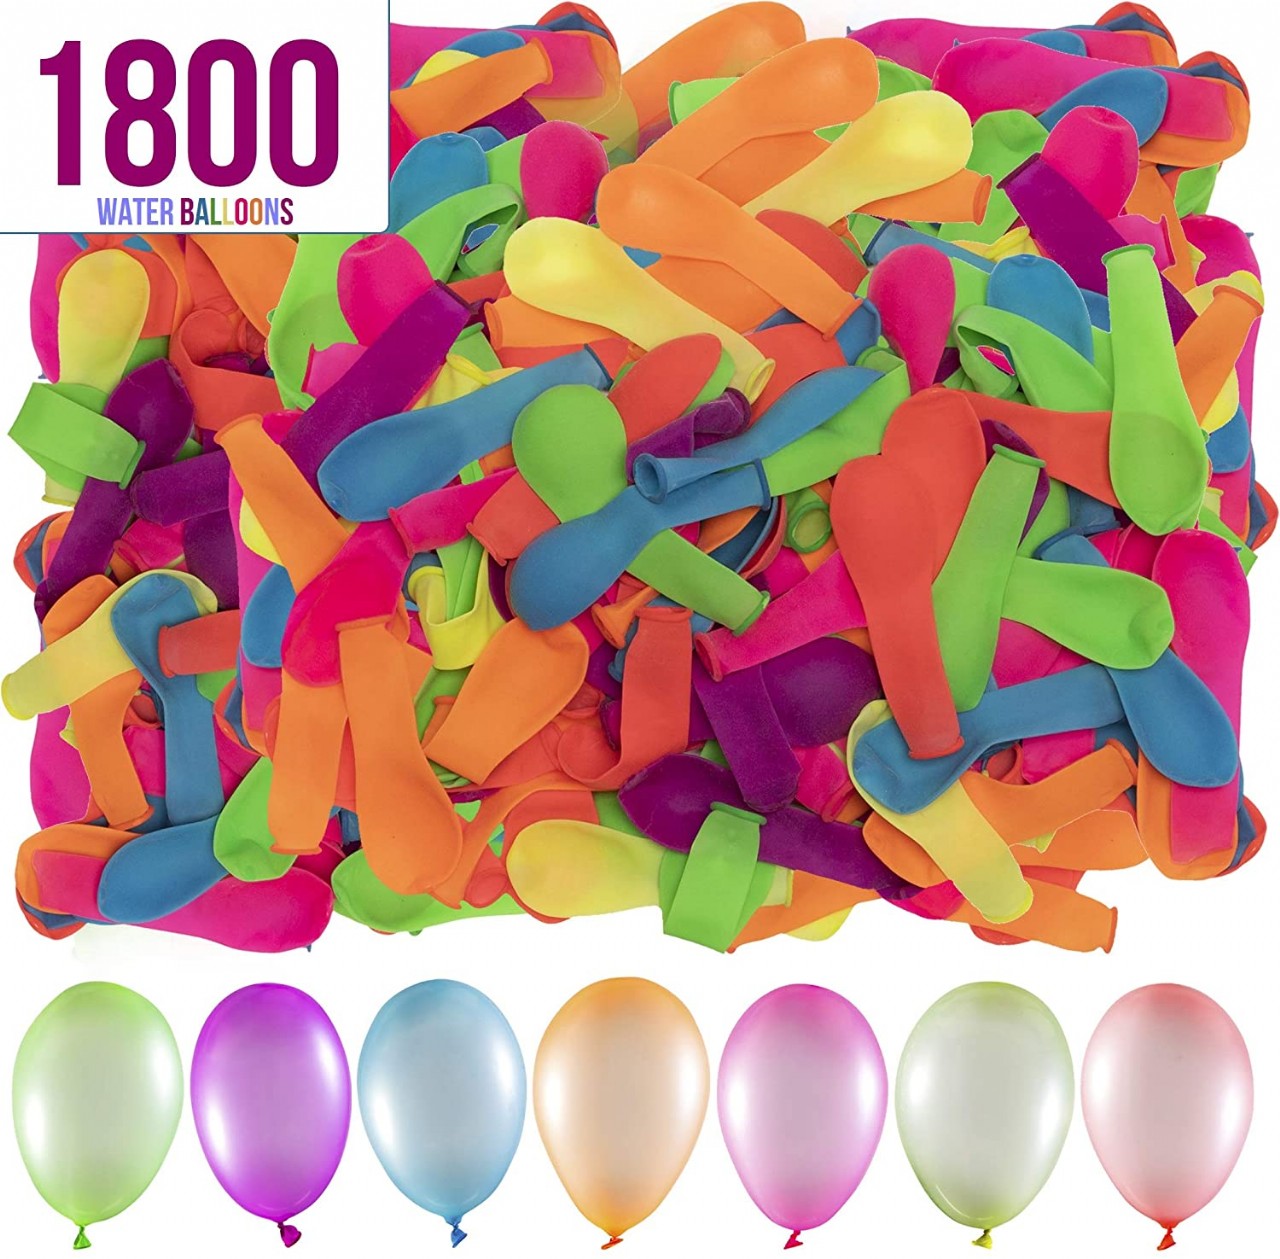 Prextex 1800 Water Balloons Bulk Balloons Pack for Water Sports Fun, Splash Fights for Pools and Out